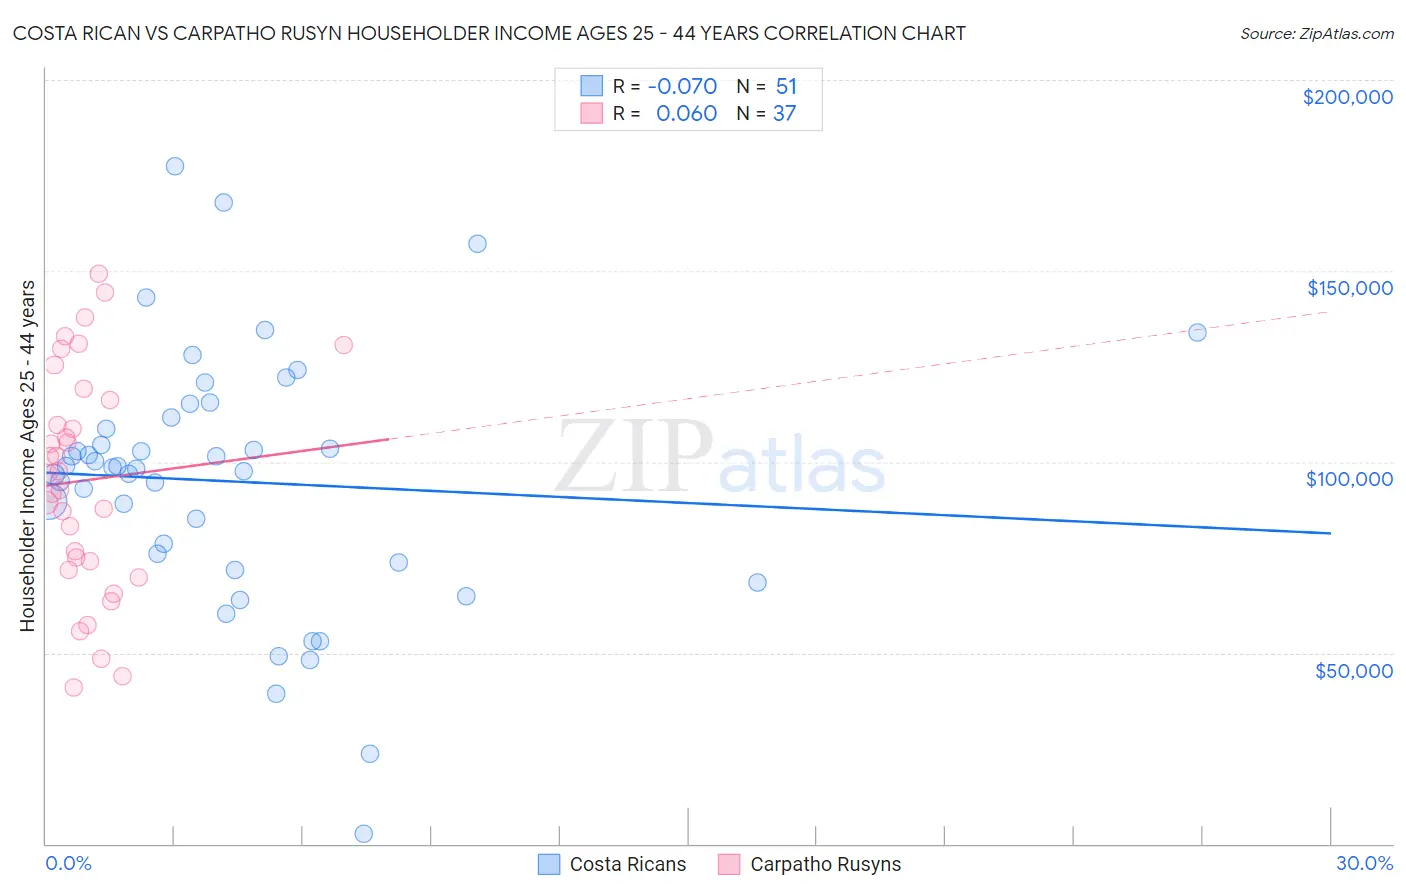 Costa Rican vs Carpatho Rusyn Householder Income Ages 25 - 44 years